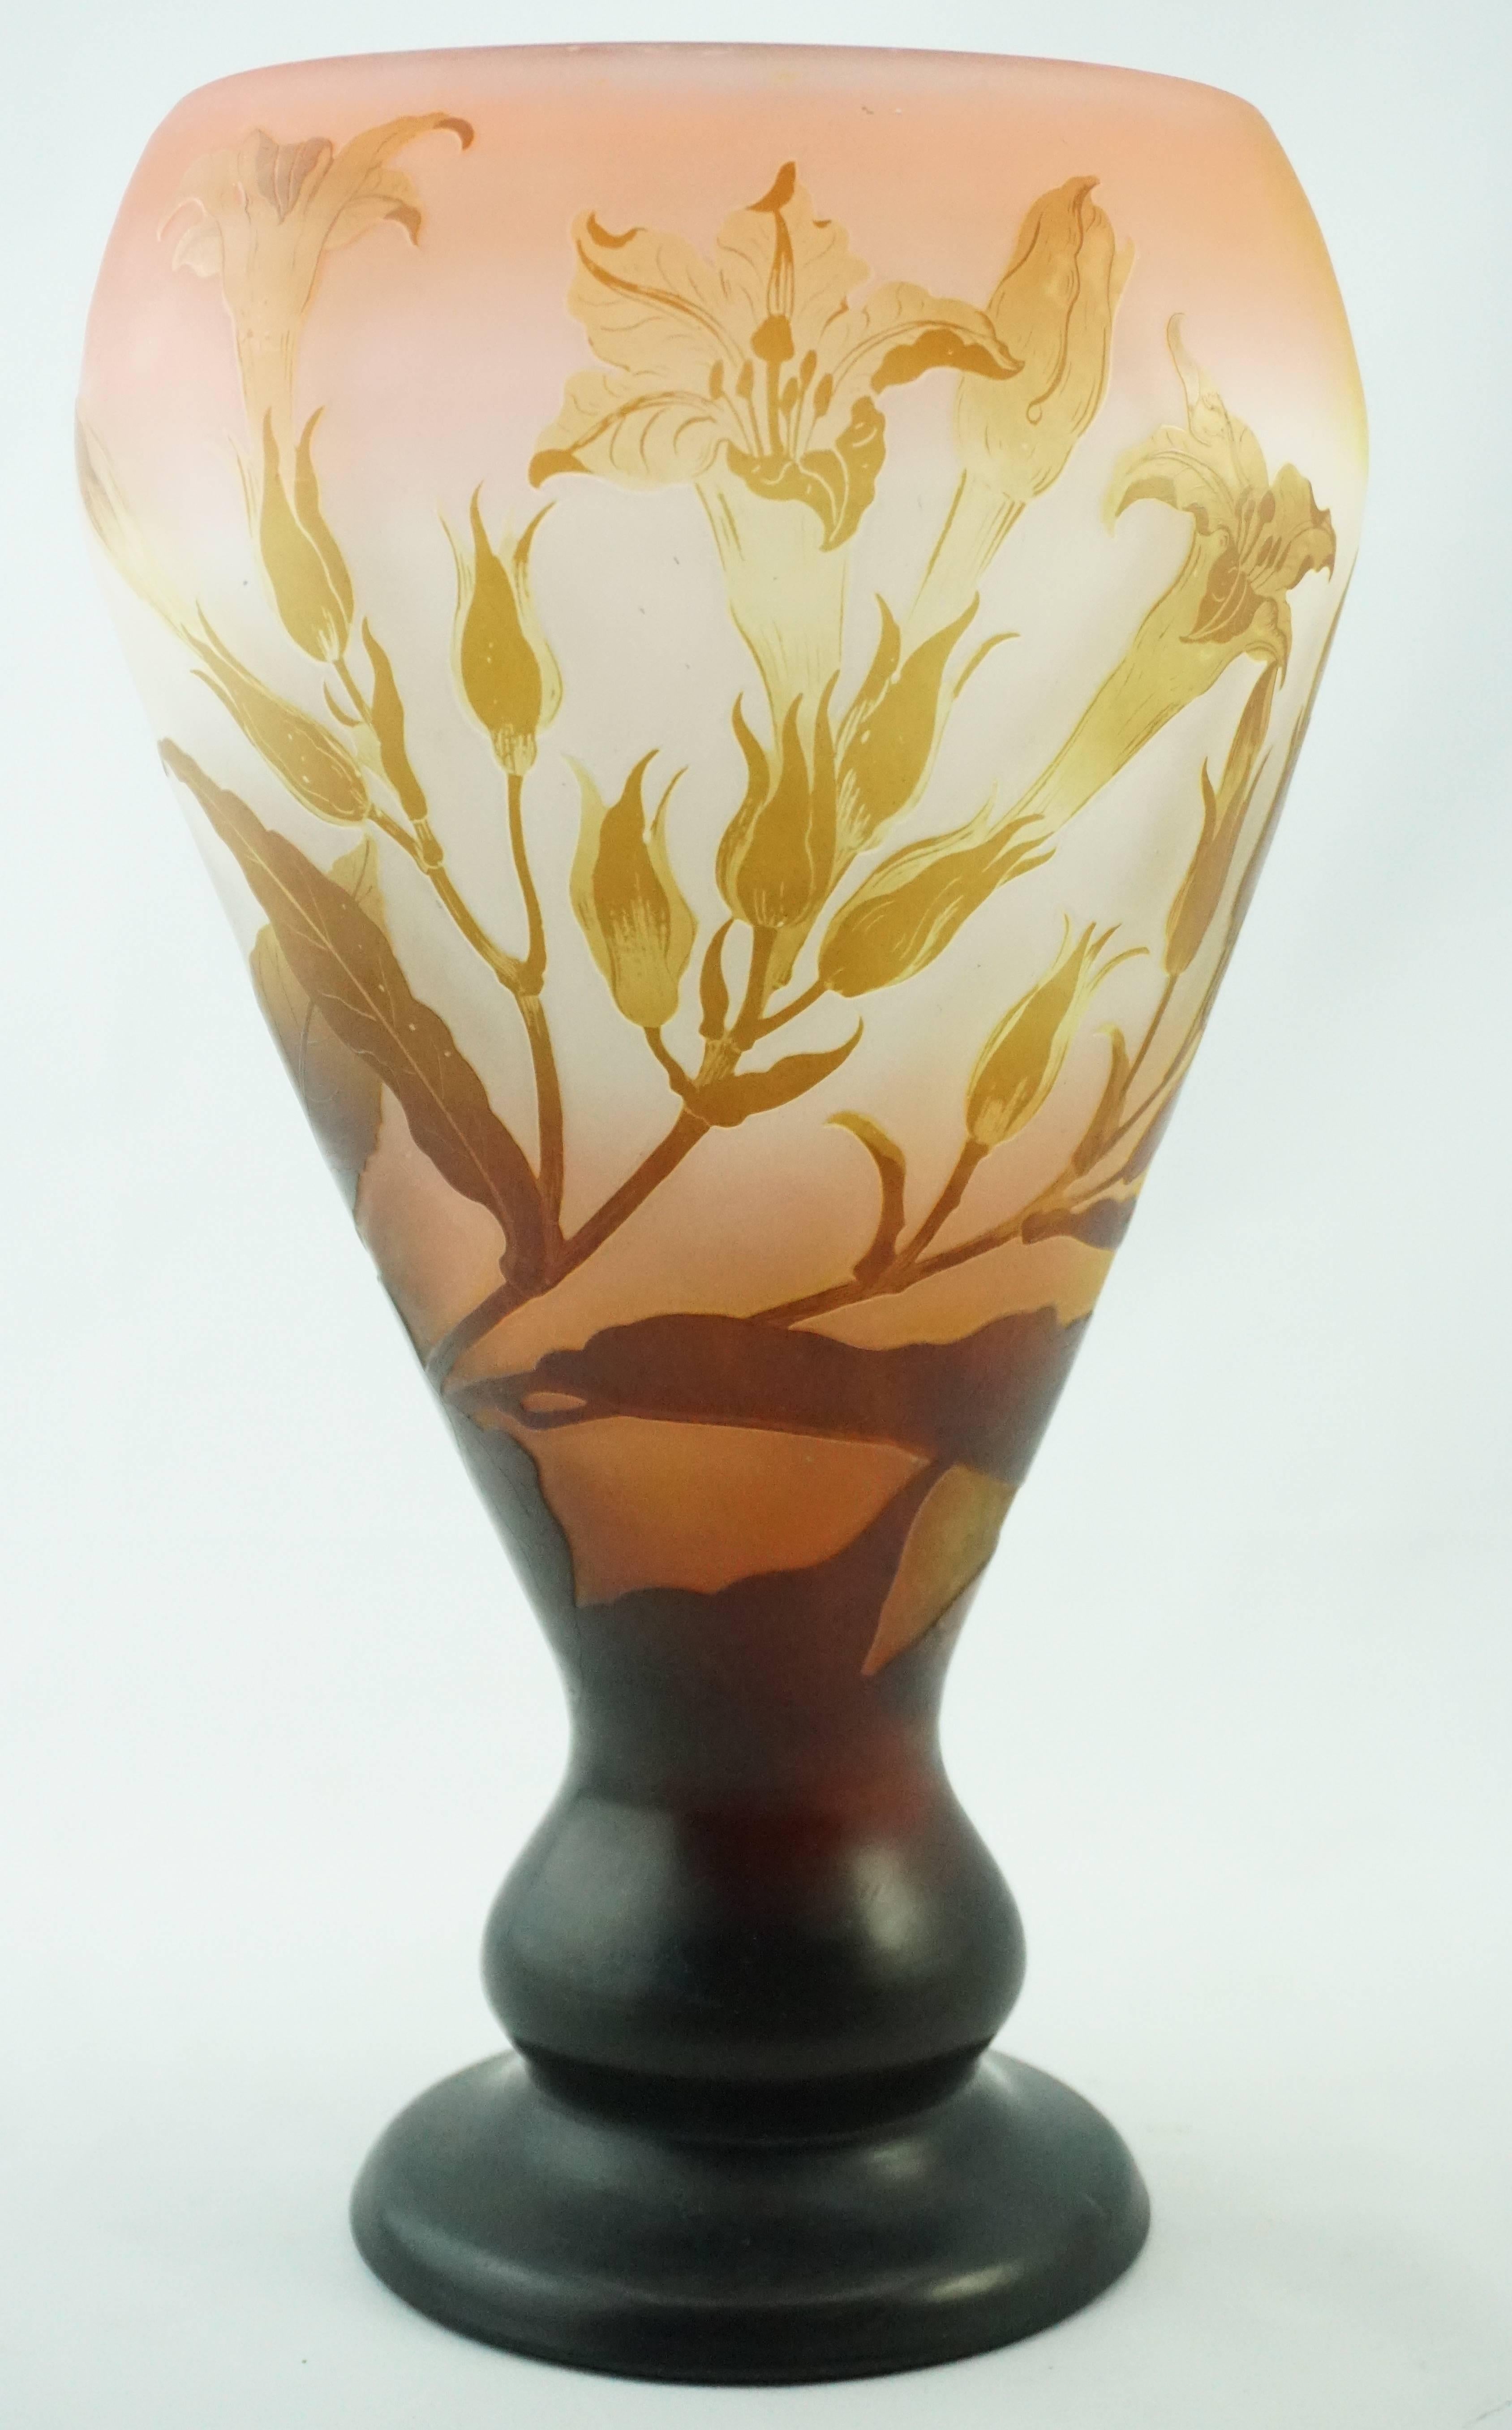 A beautiful Emile Galle acid etched window pane cameo glass vase depicting lilies and foliage. Nancy, France, circa 1904. Art Nouveau

Signed Galle with star

Measure: Height 12.3 inches
Width 7 inches

Condition is excellent with wear